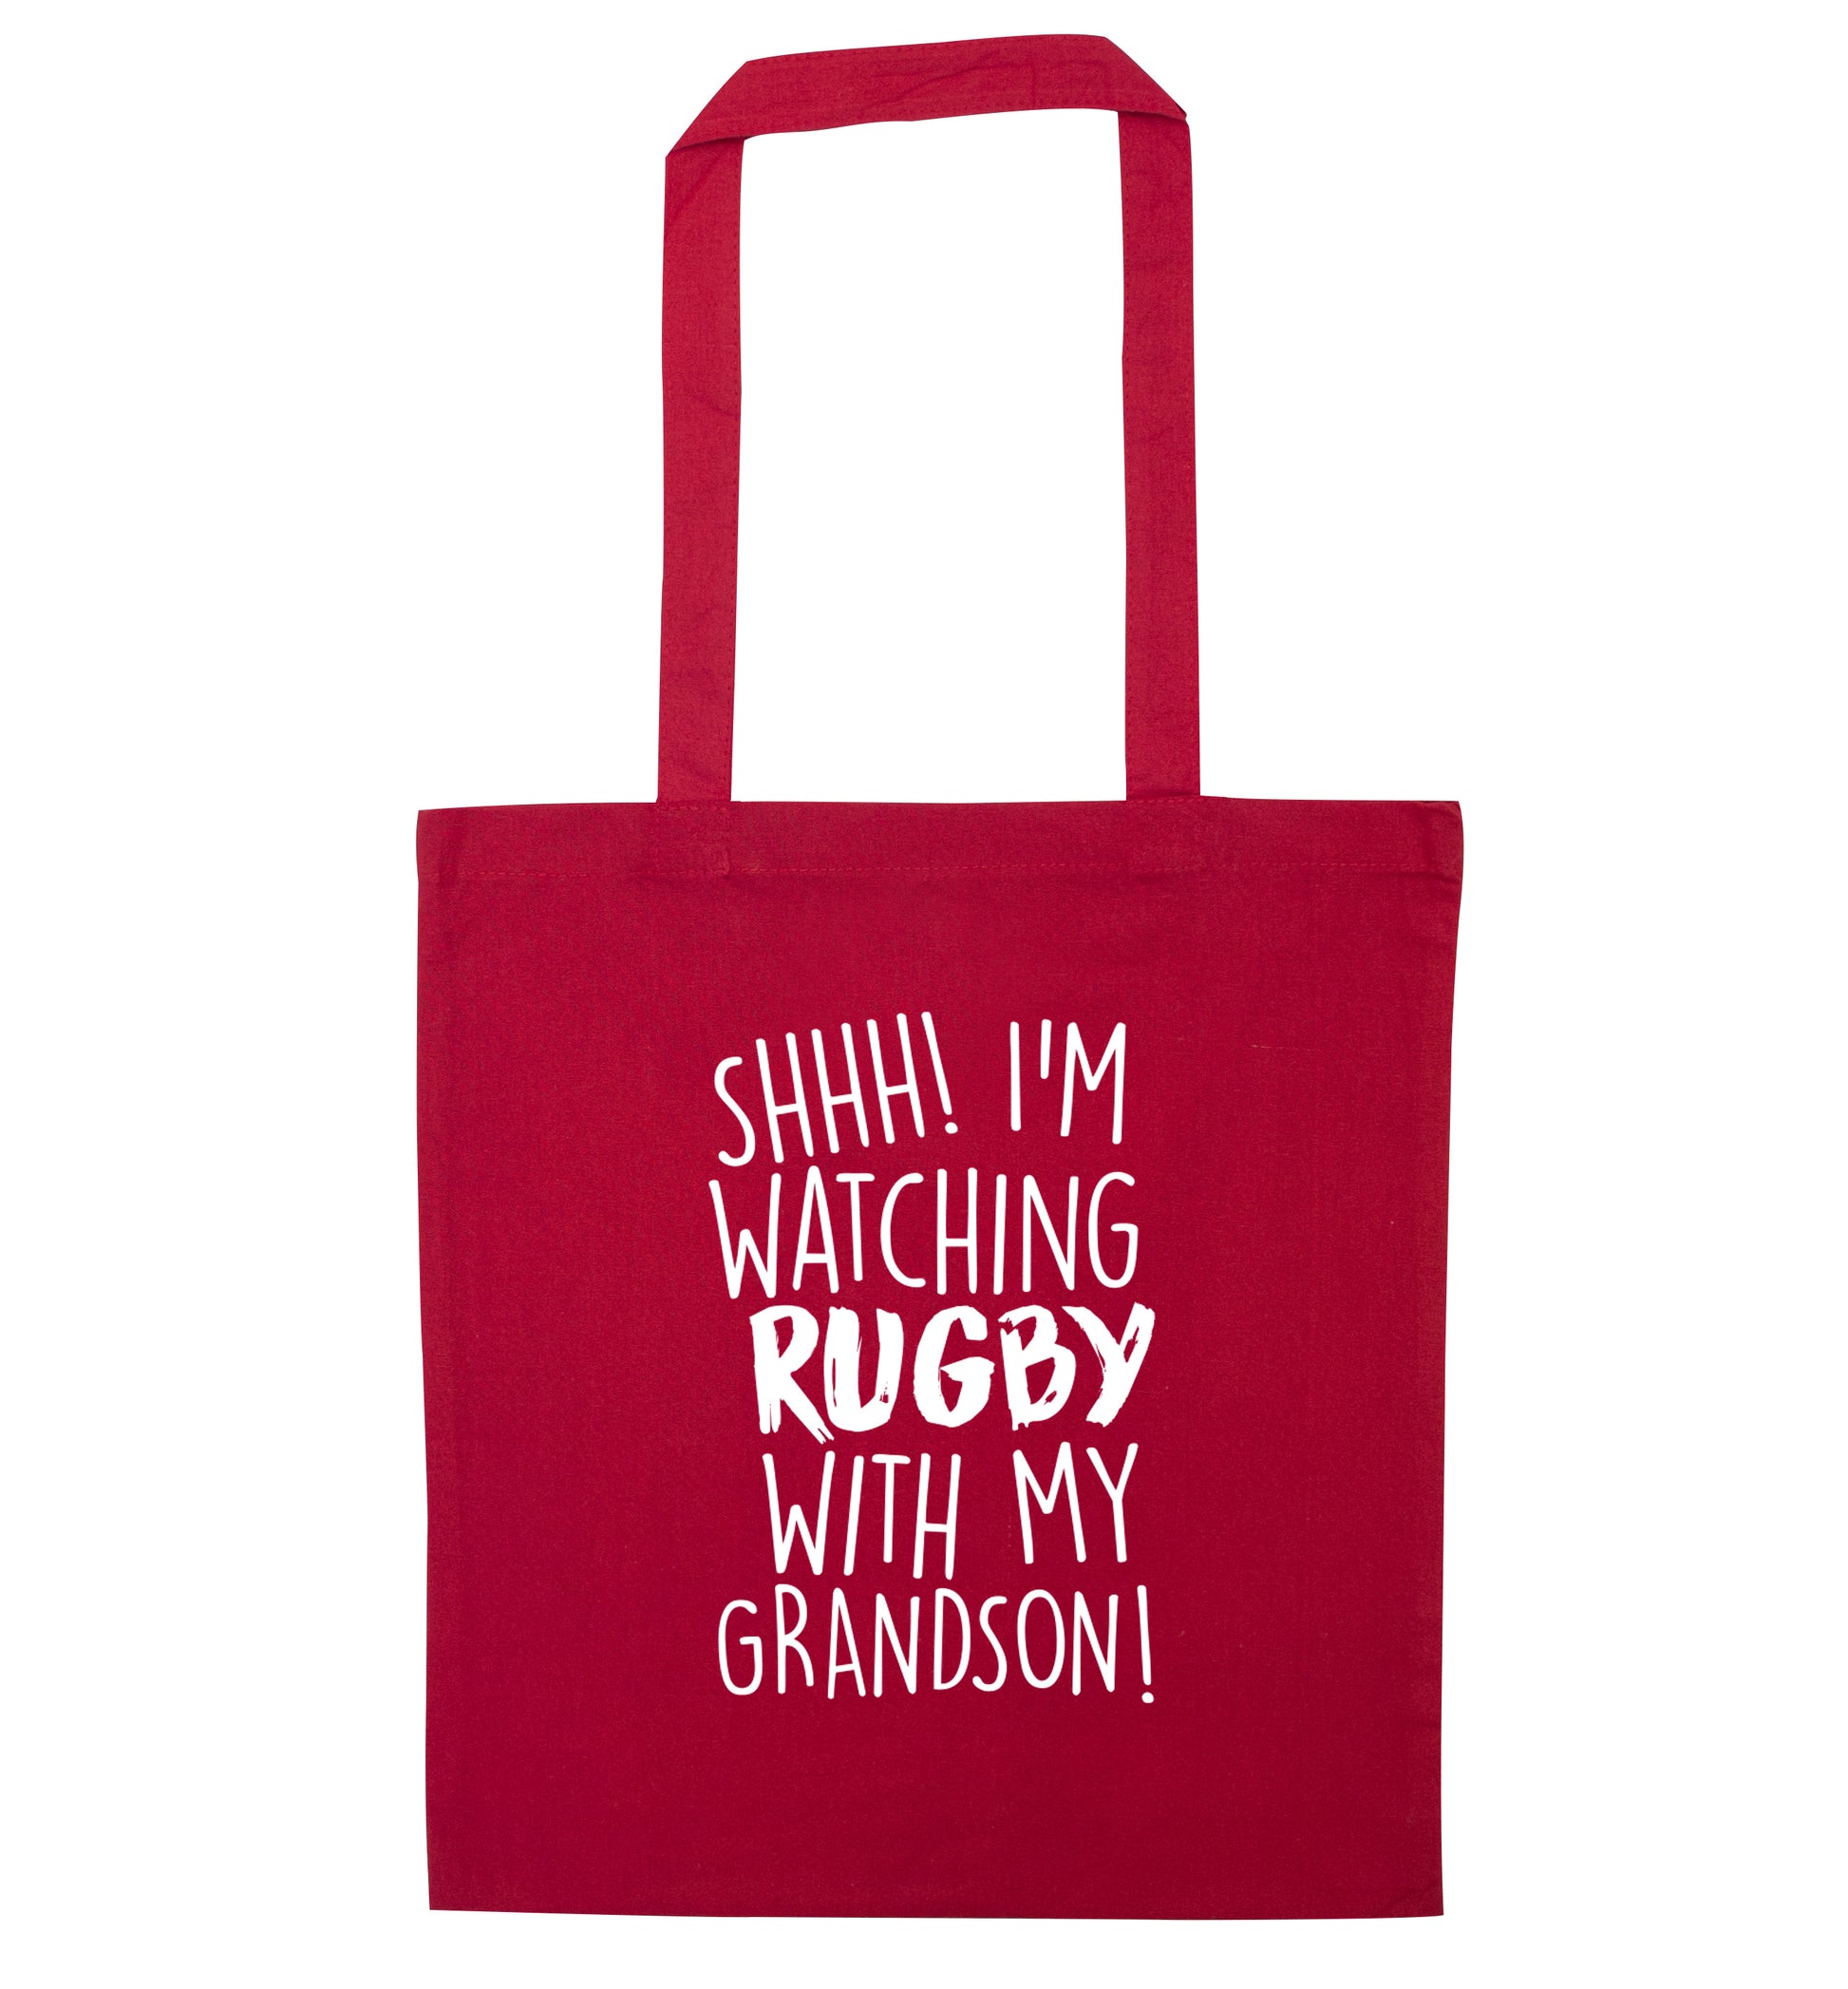 Shh I'm watching rugby with my grandson red tote bag